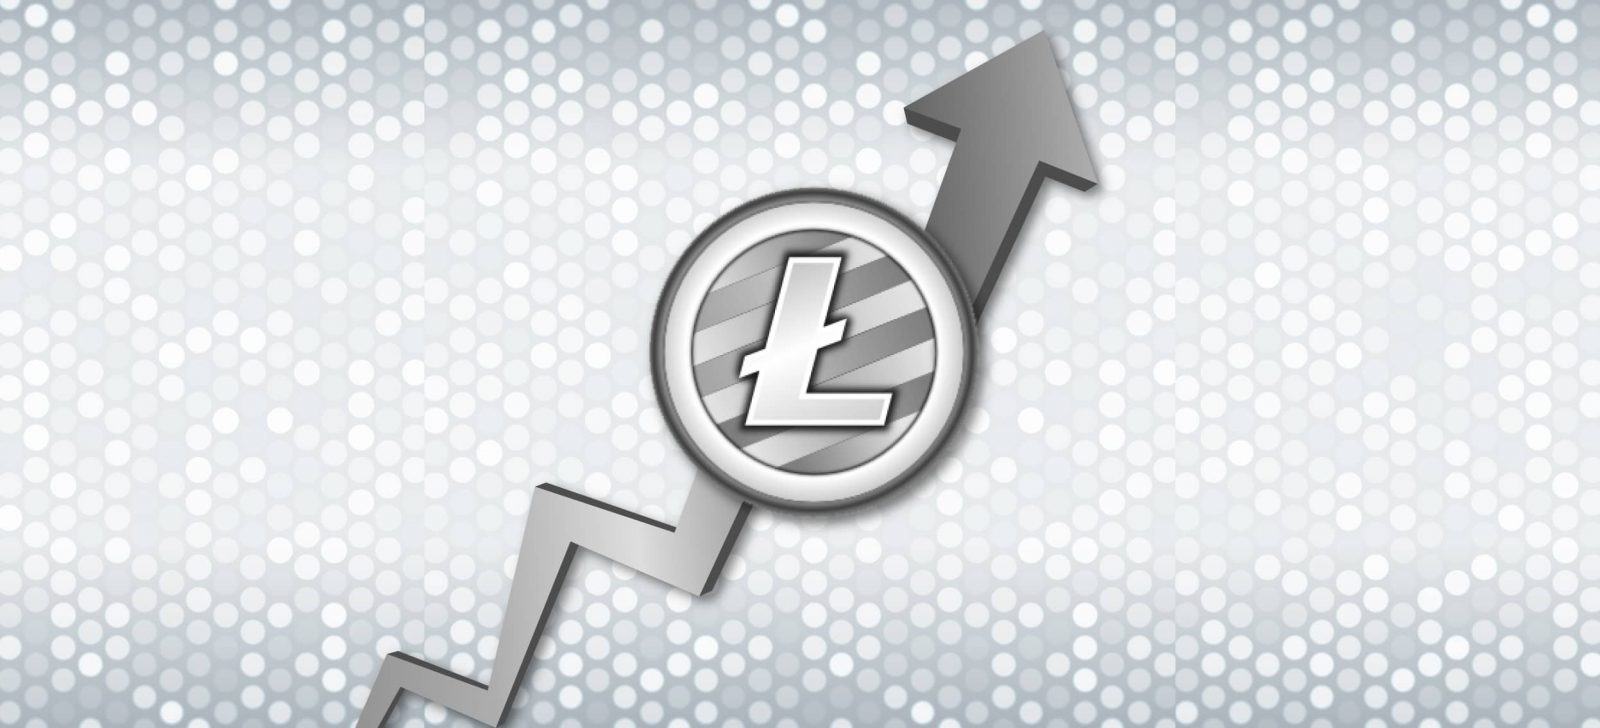 3 Reasons Why Litecoin Will Explode in 2018